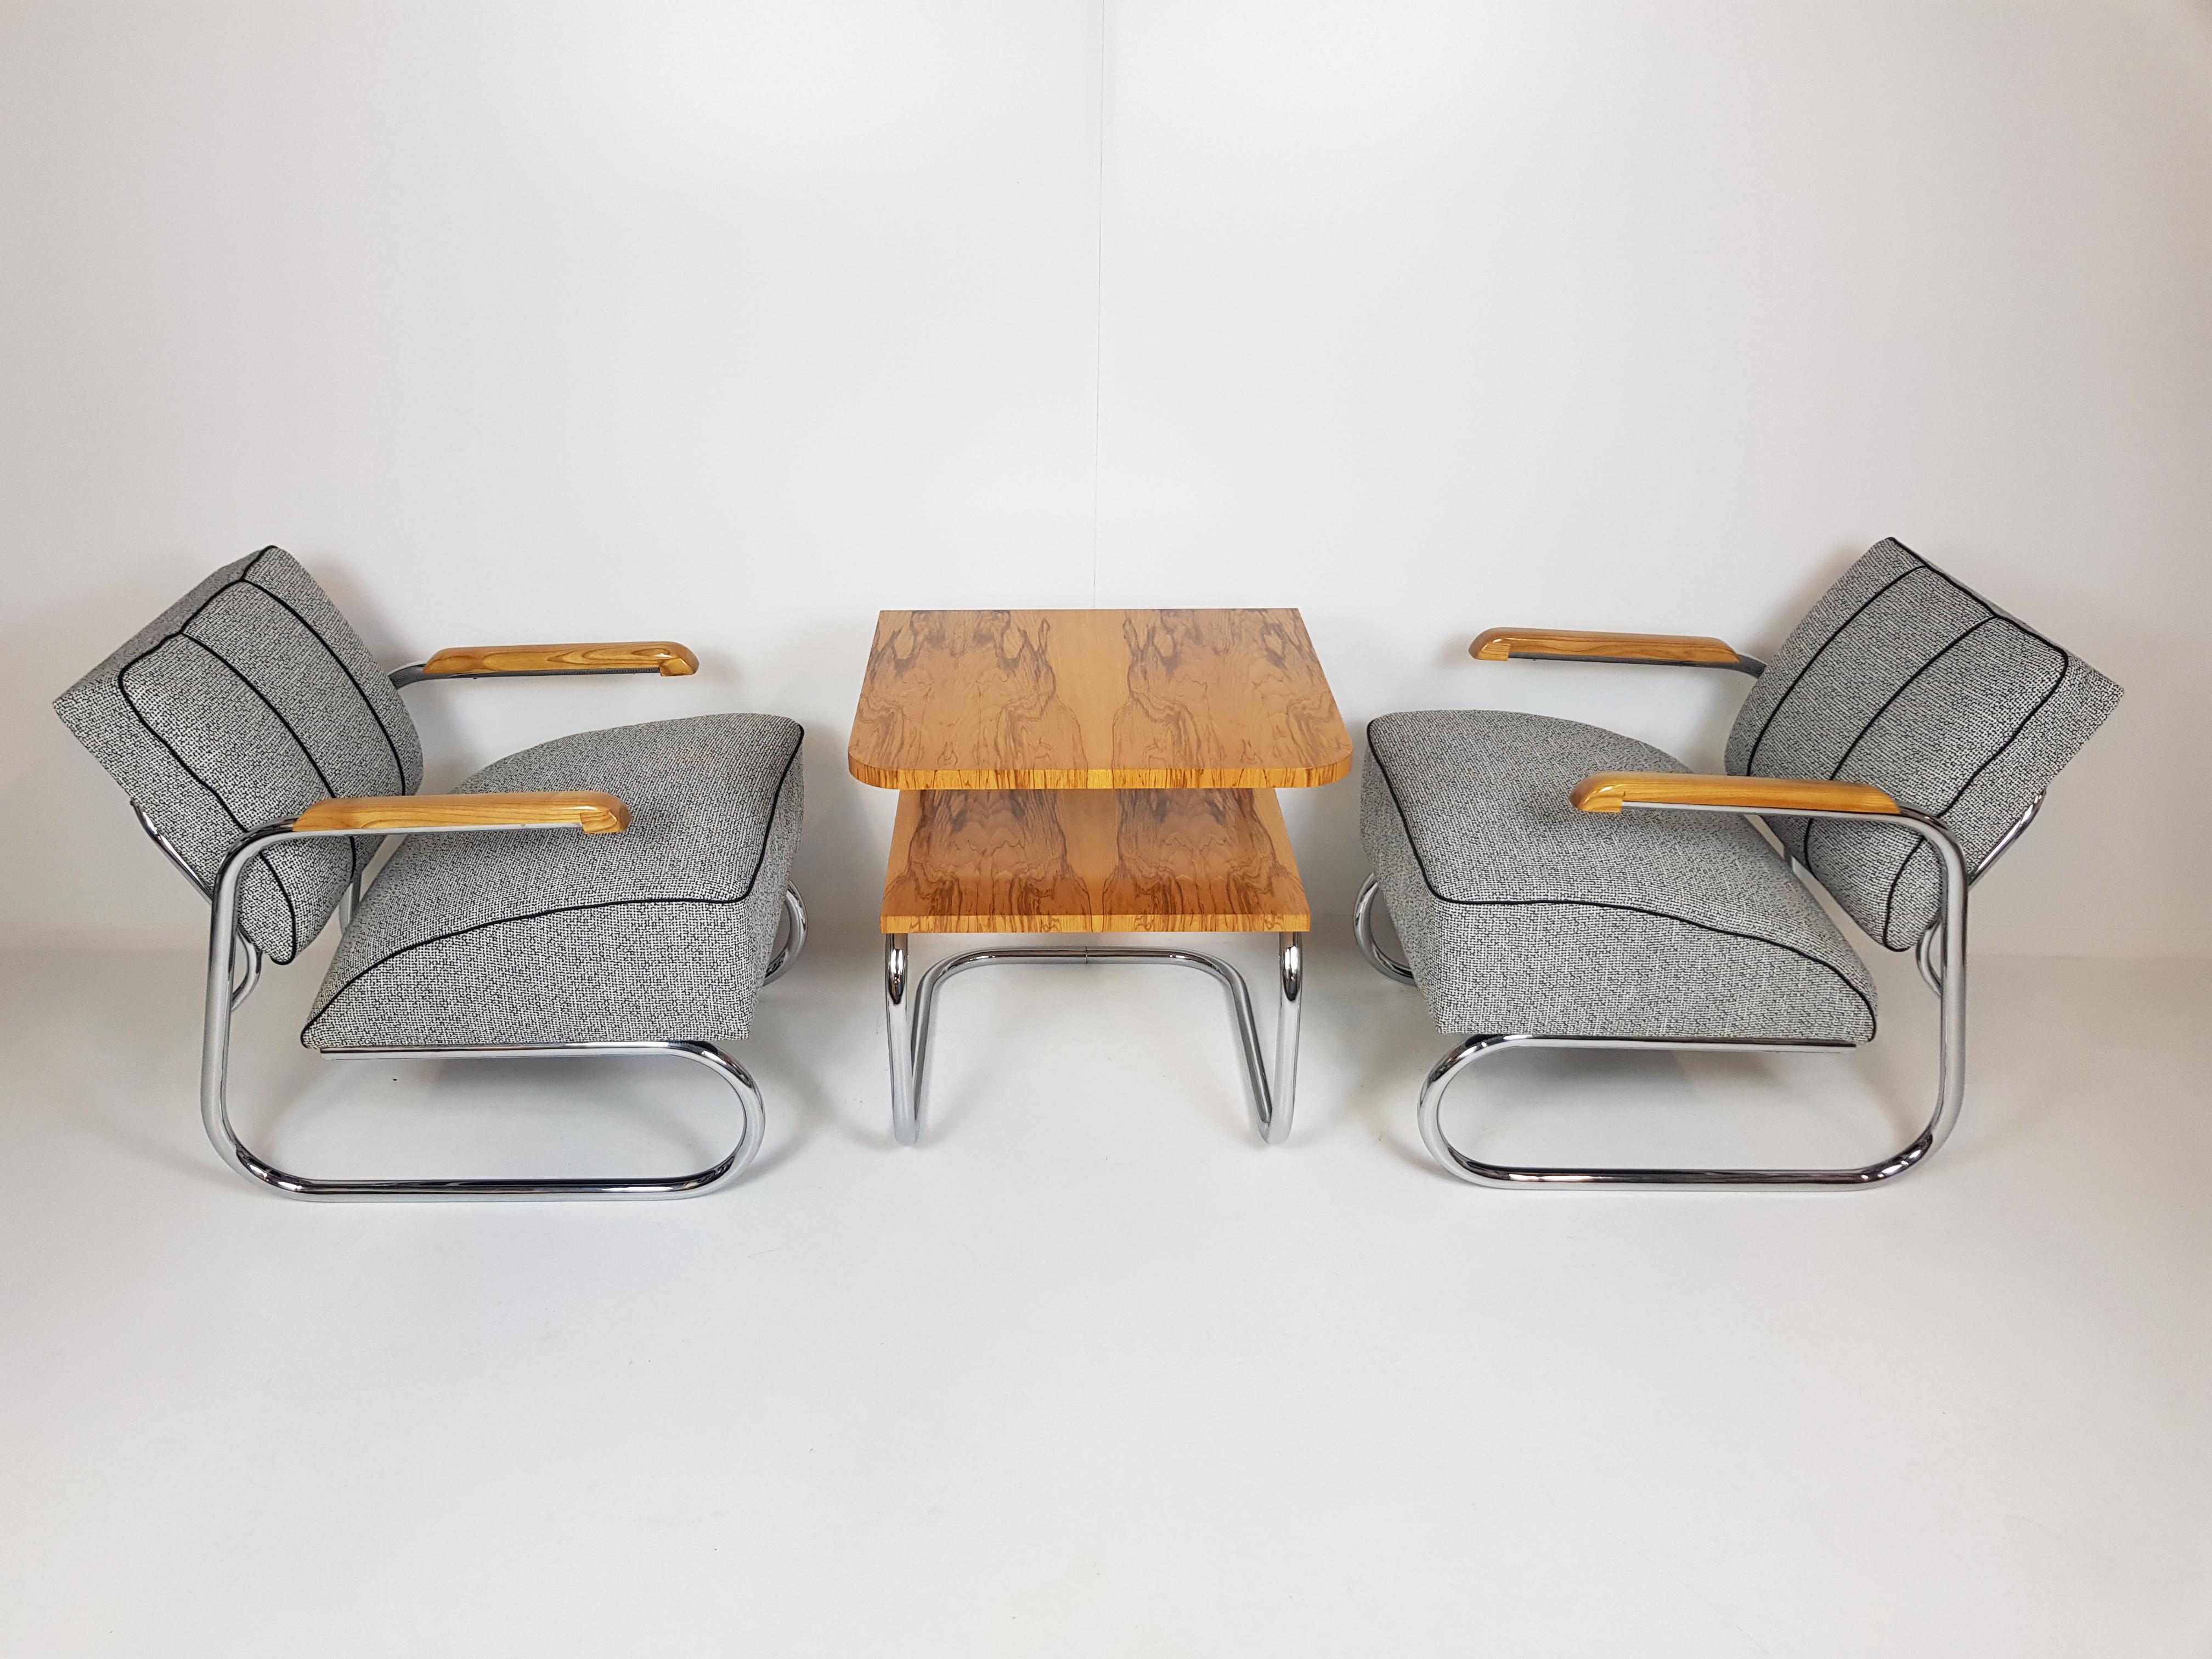 Pair of two rare Bauhaus or functionalist armchairs and table produced in Hynek Gottwald's furniture factory (catalogued). Completely renovated, newly chromed. Newly reupholstered in fabric with minimalist black and white pattern.
Measures: